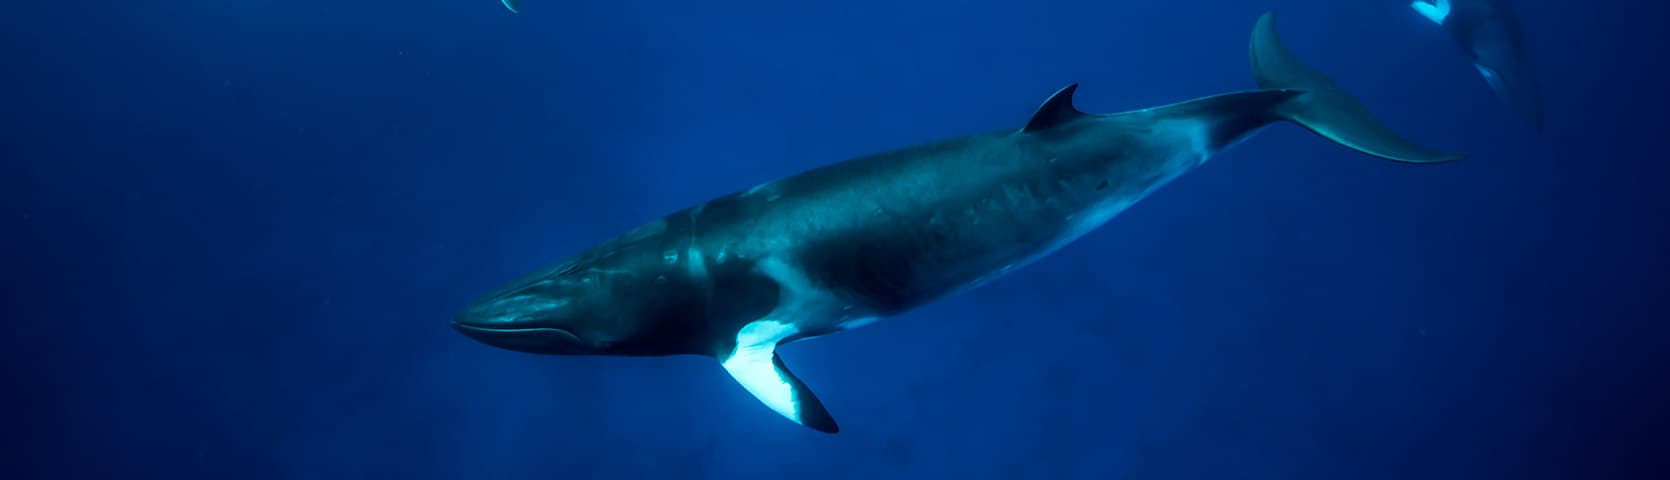 Dwarf minke whales_GBR citizen science expedition 2021